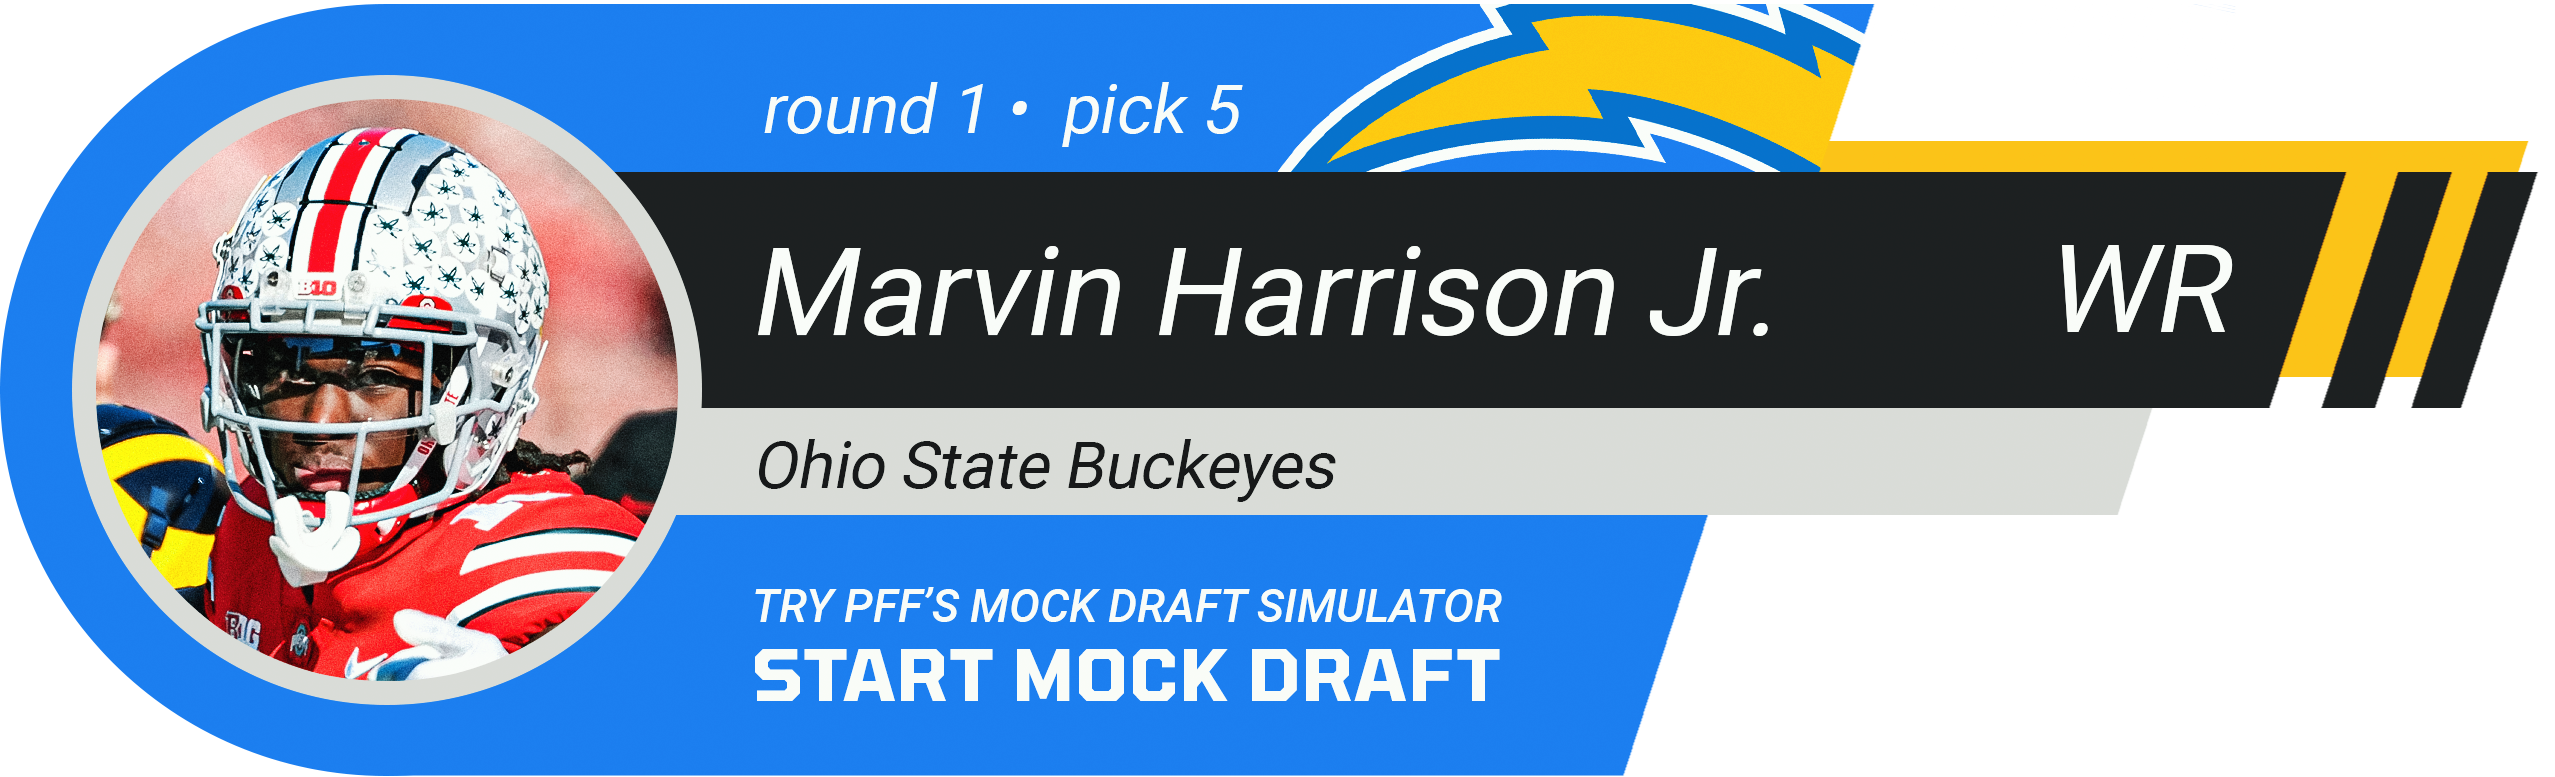 5. LOS ANGELES CHARGERS: WR Marvin Harrison Jr., Ohio State